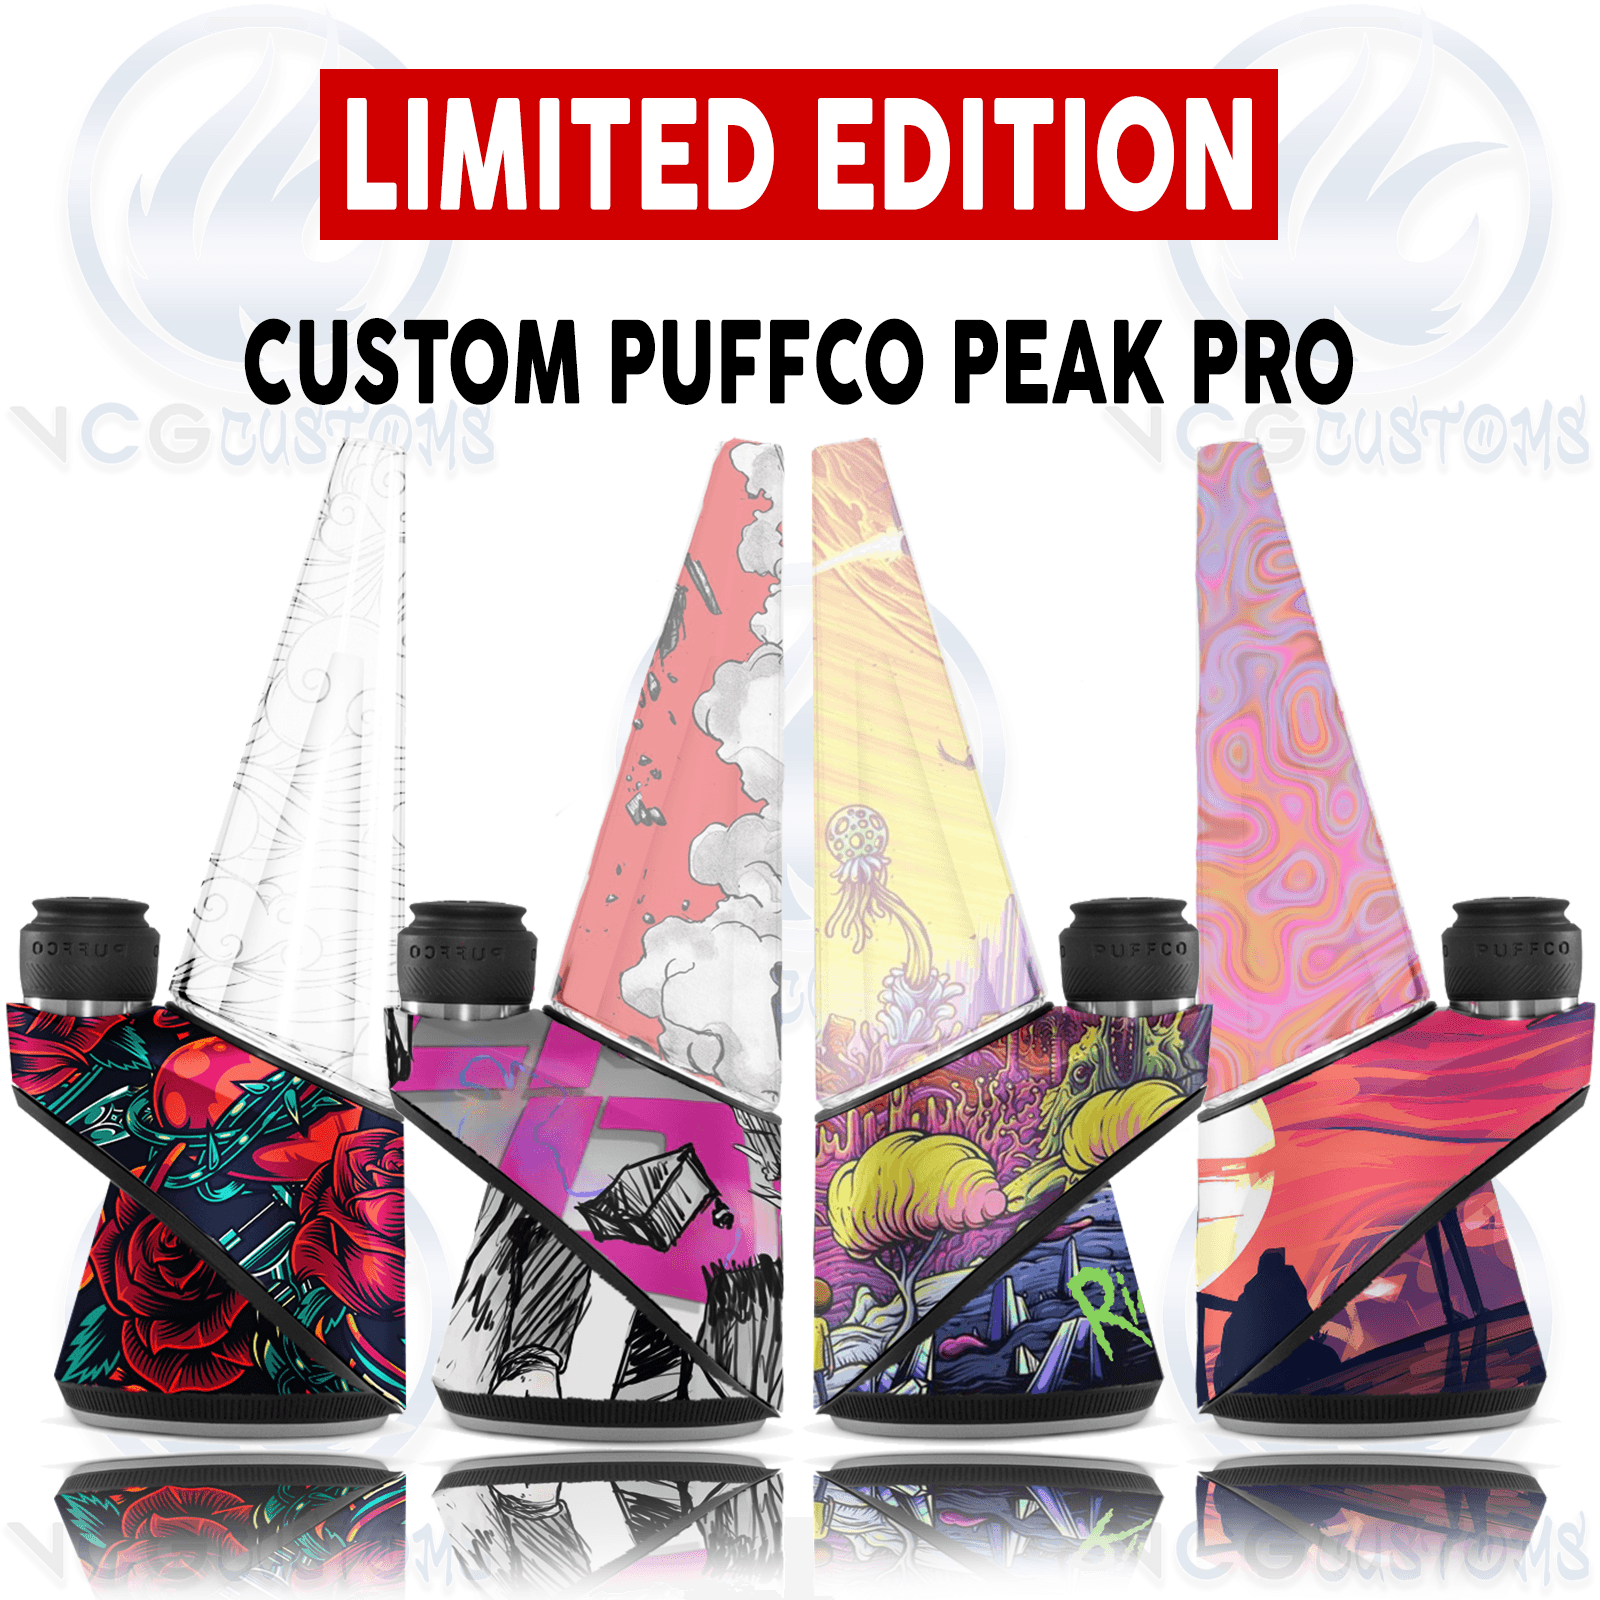 LIMITED EDITION: Custom Puffco Peak Pro Portable Wax And